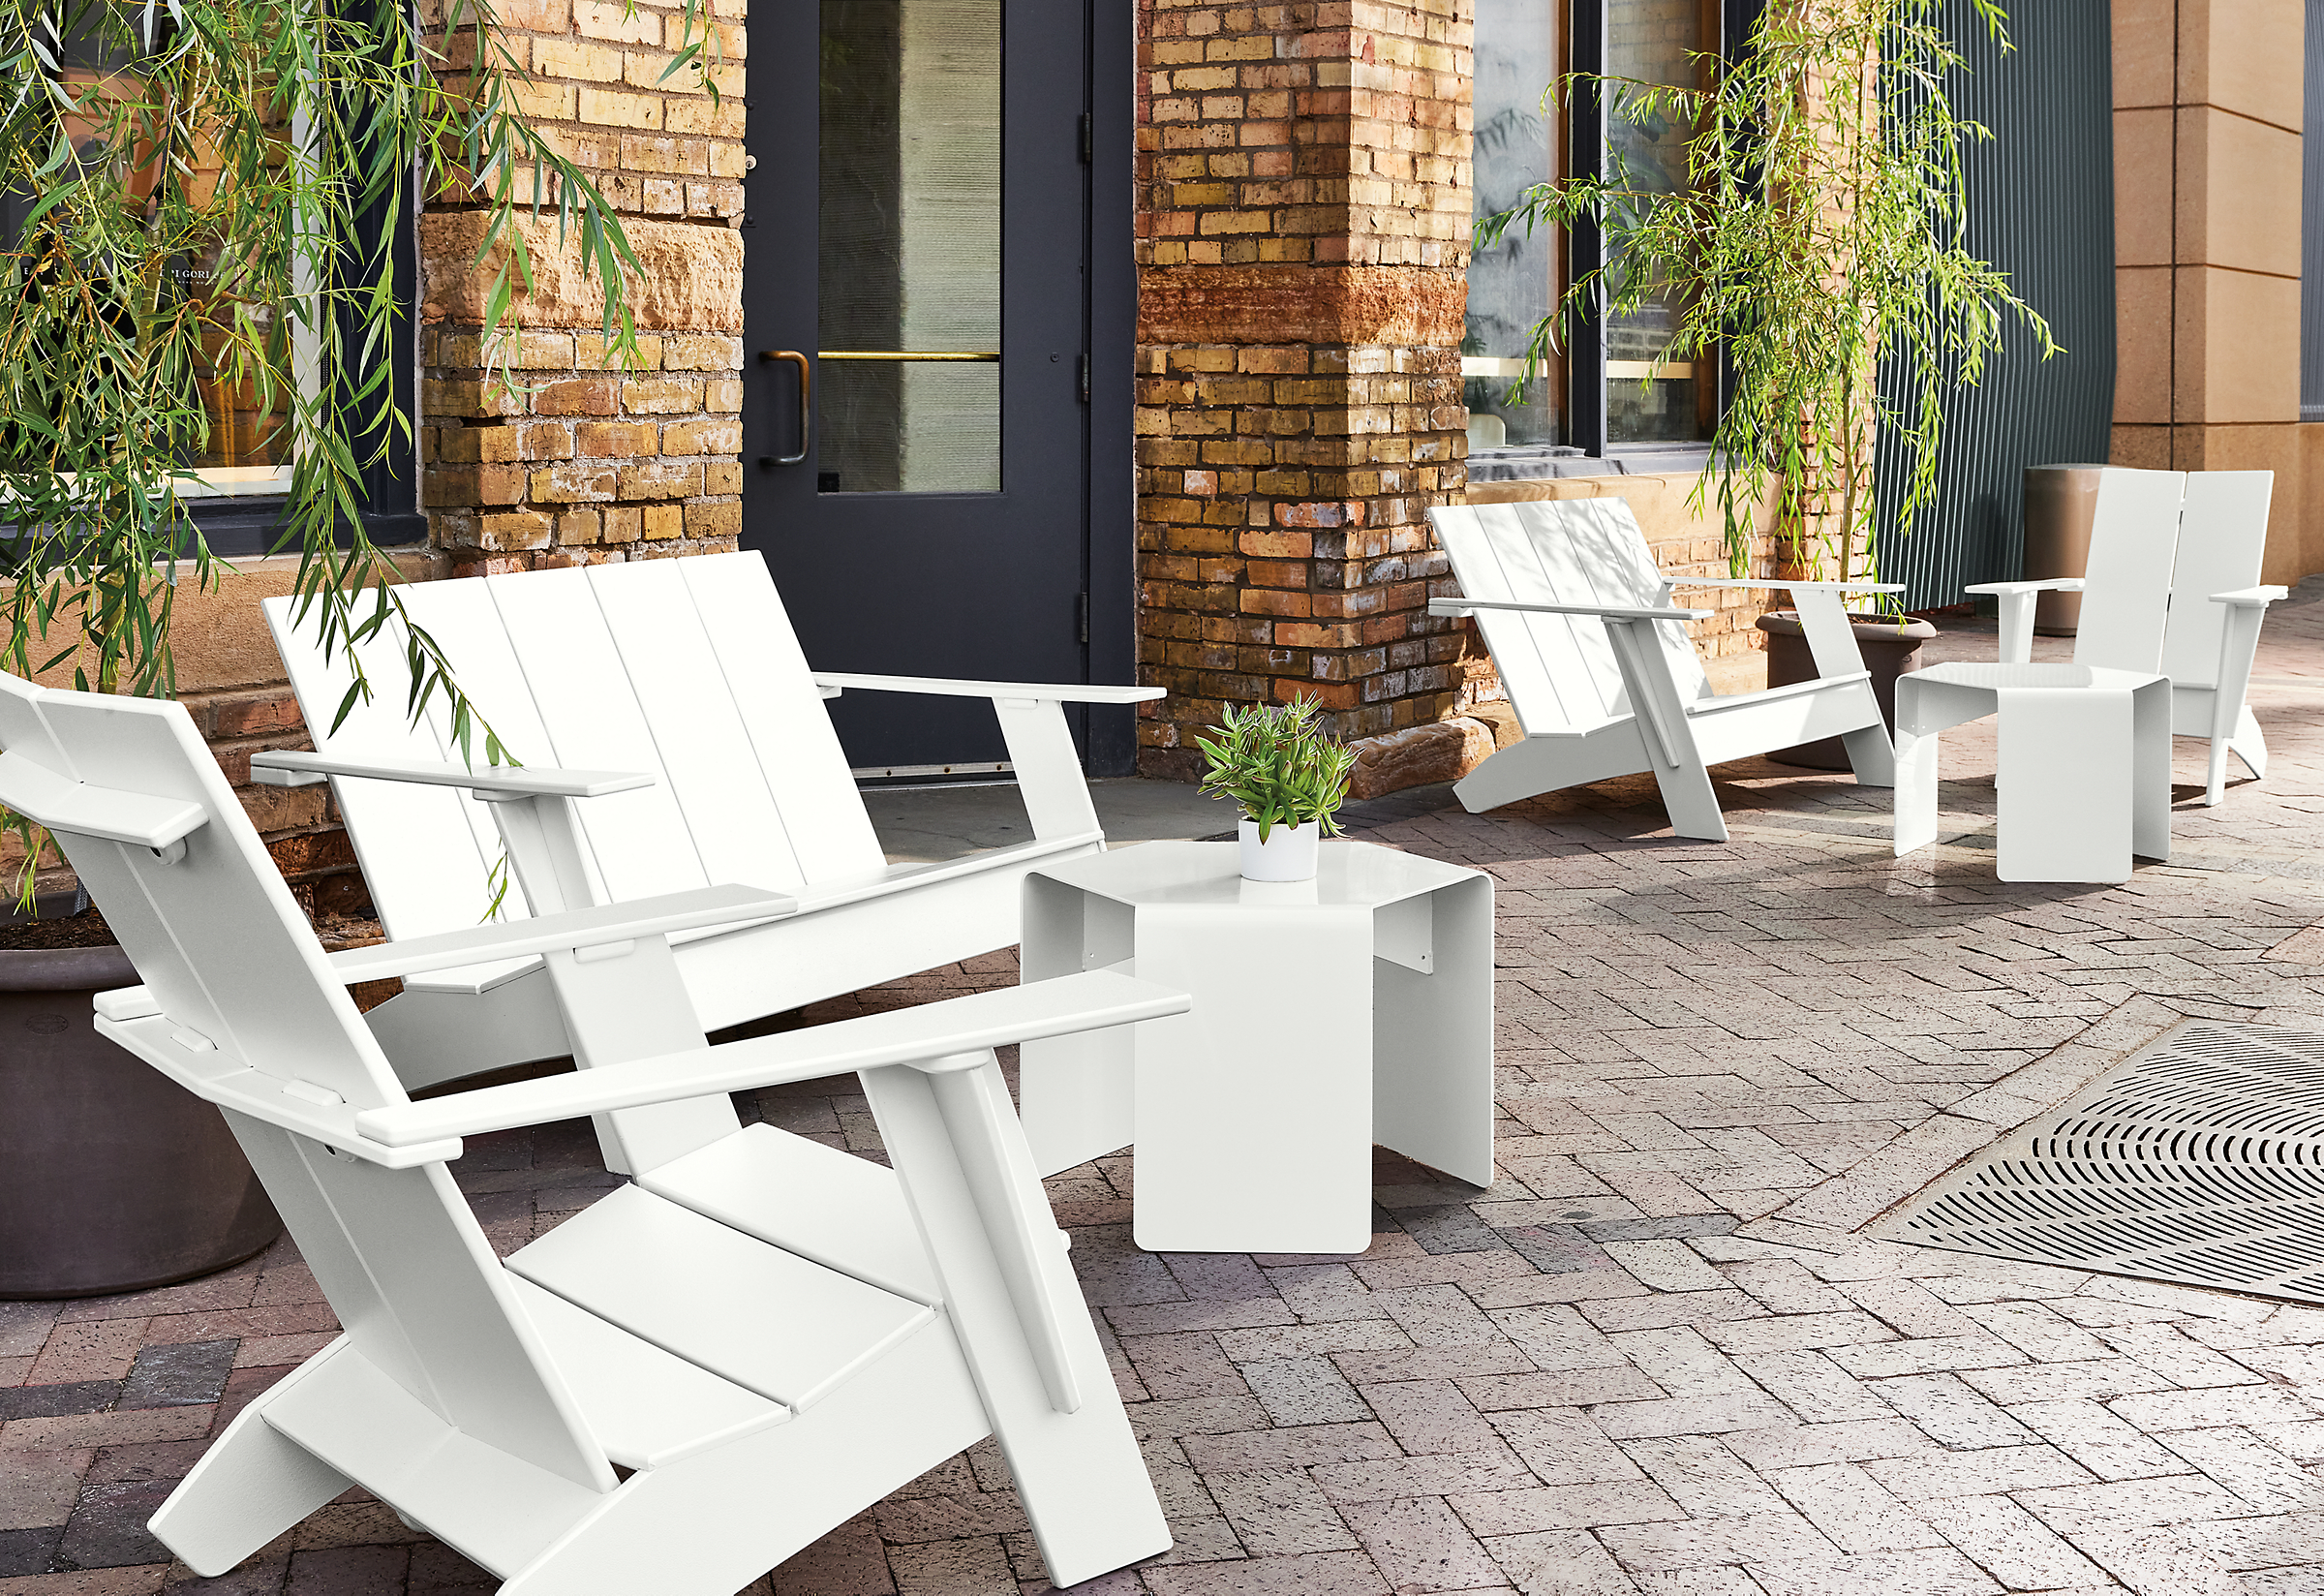 Outdoor space with several emmet sofas and chairs in white, with cell outdoor side tables and gilyard planters.